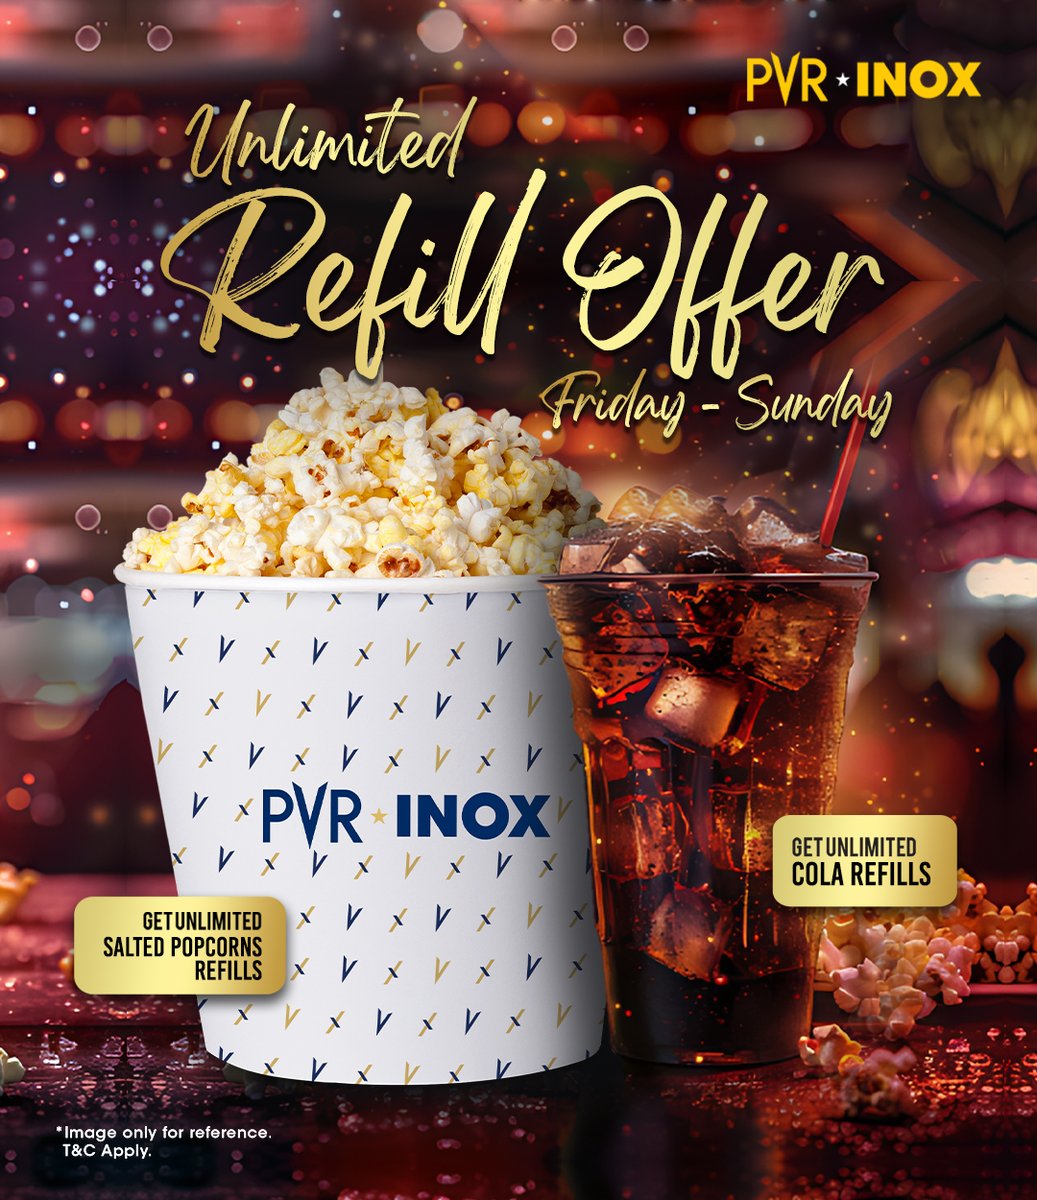 Let’s get the weekend started! 🎉😋 Indulge in some quality entertainment with the unlimited refill offer from Friday to Sunday. Get unlimited salted popcorn and Cola refills to keep the excitement going! 🥤🎬 . . . #UnlimitedRefillOffer #Tasty #PVRTreats #UnlimitedRefills